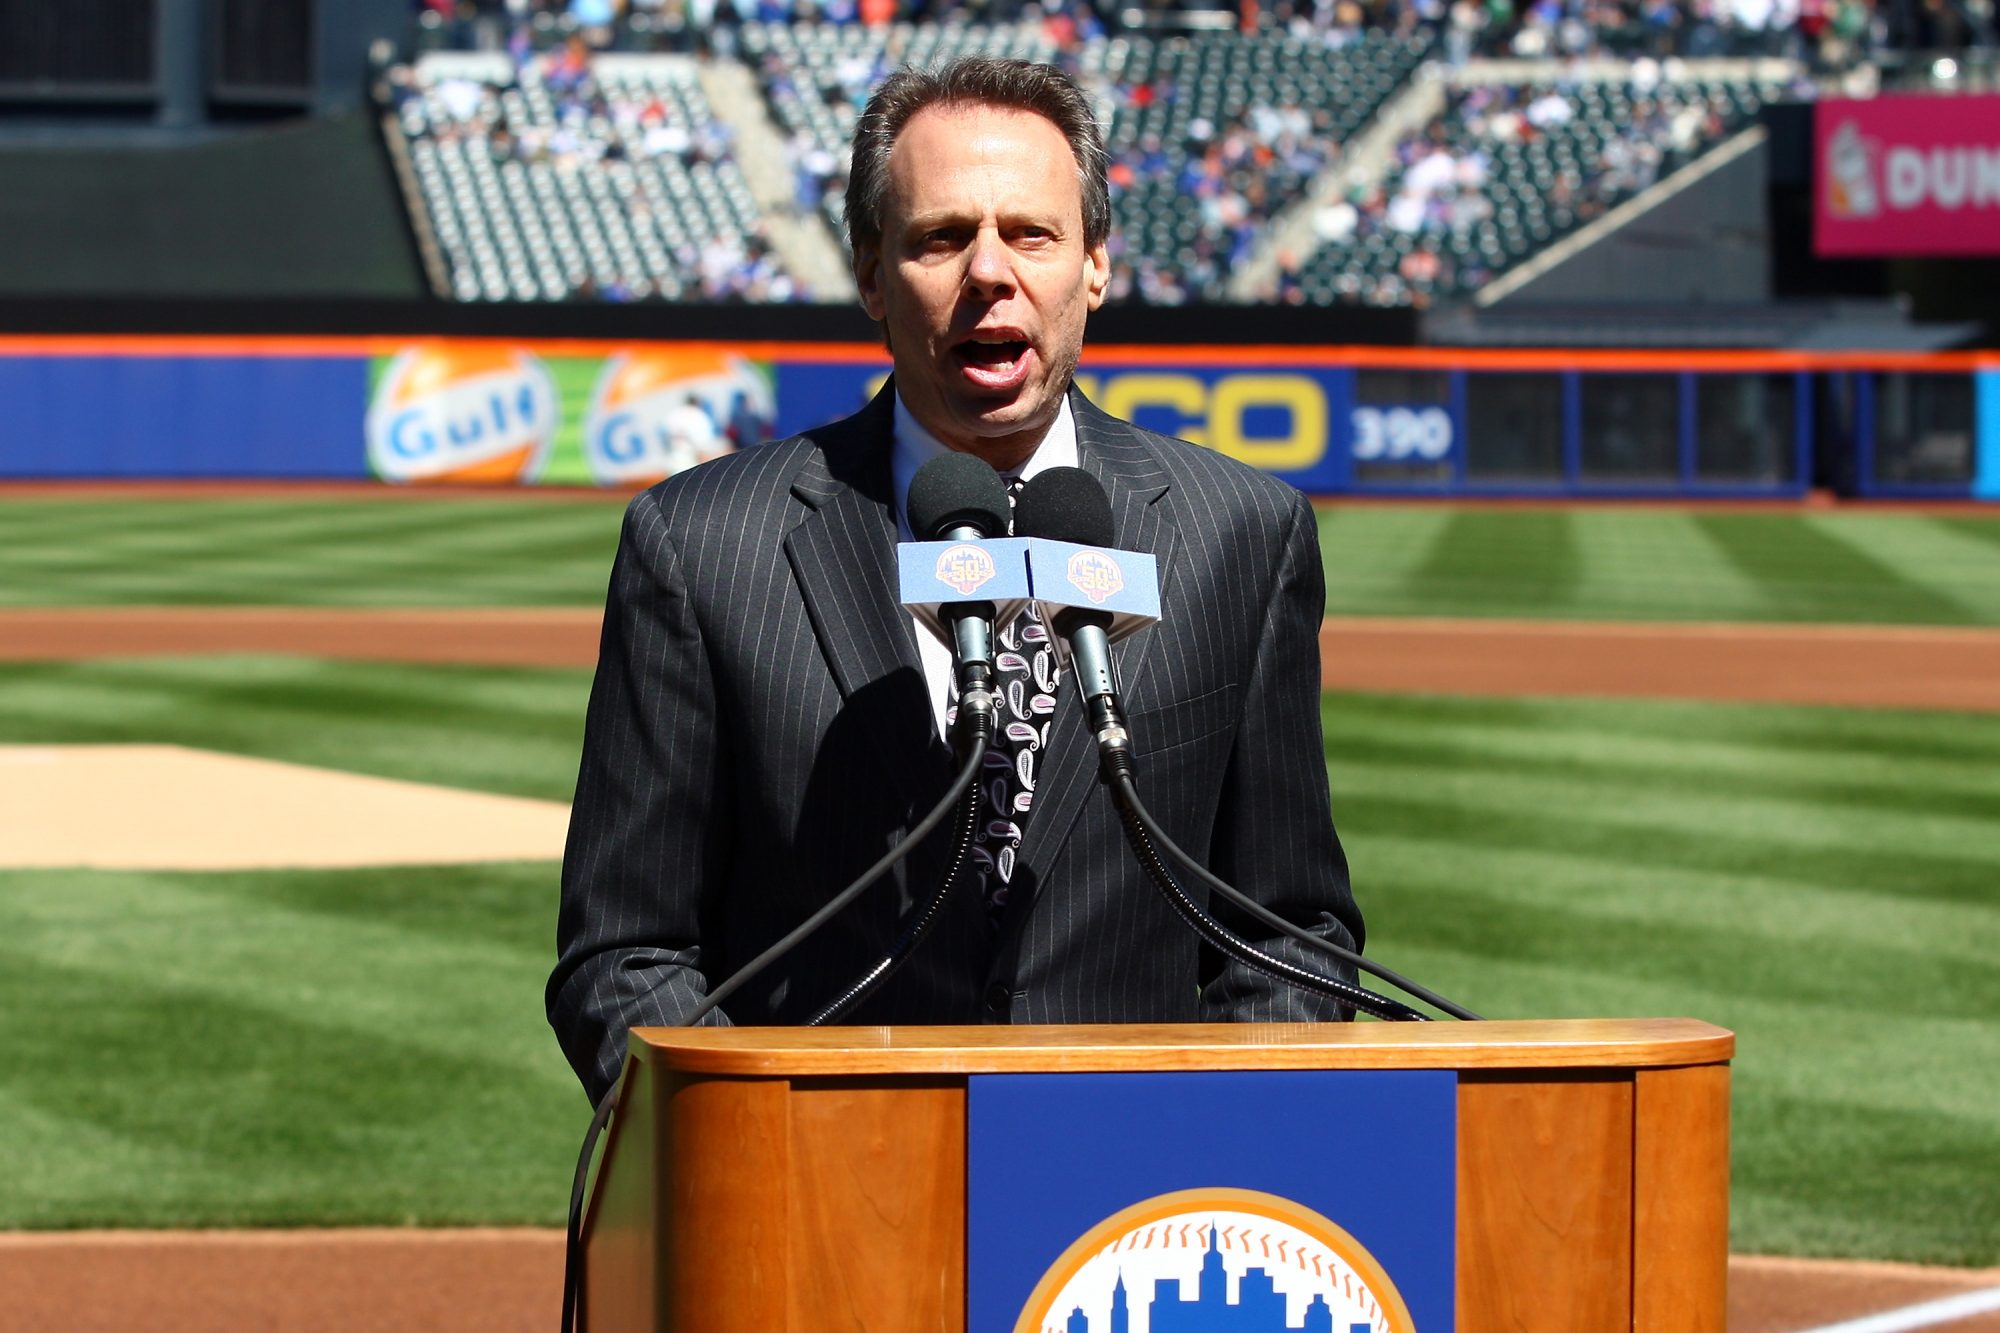 Mets Radio Announcer Howie Rose Is Fed Up With ESPN 